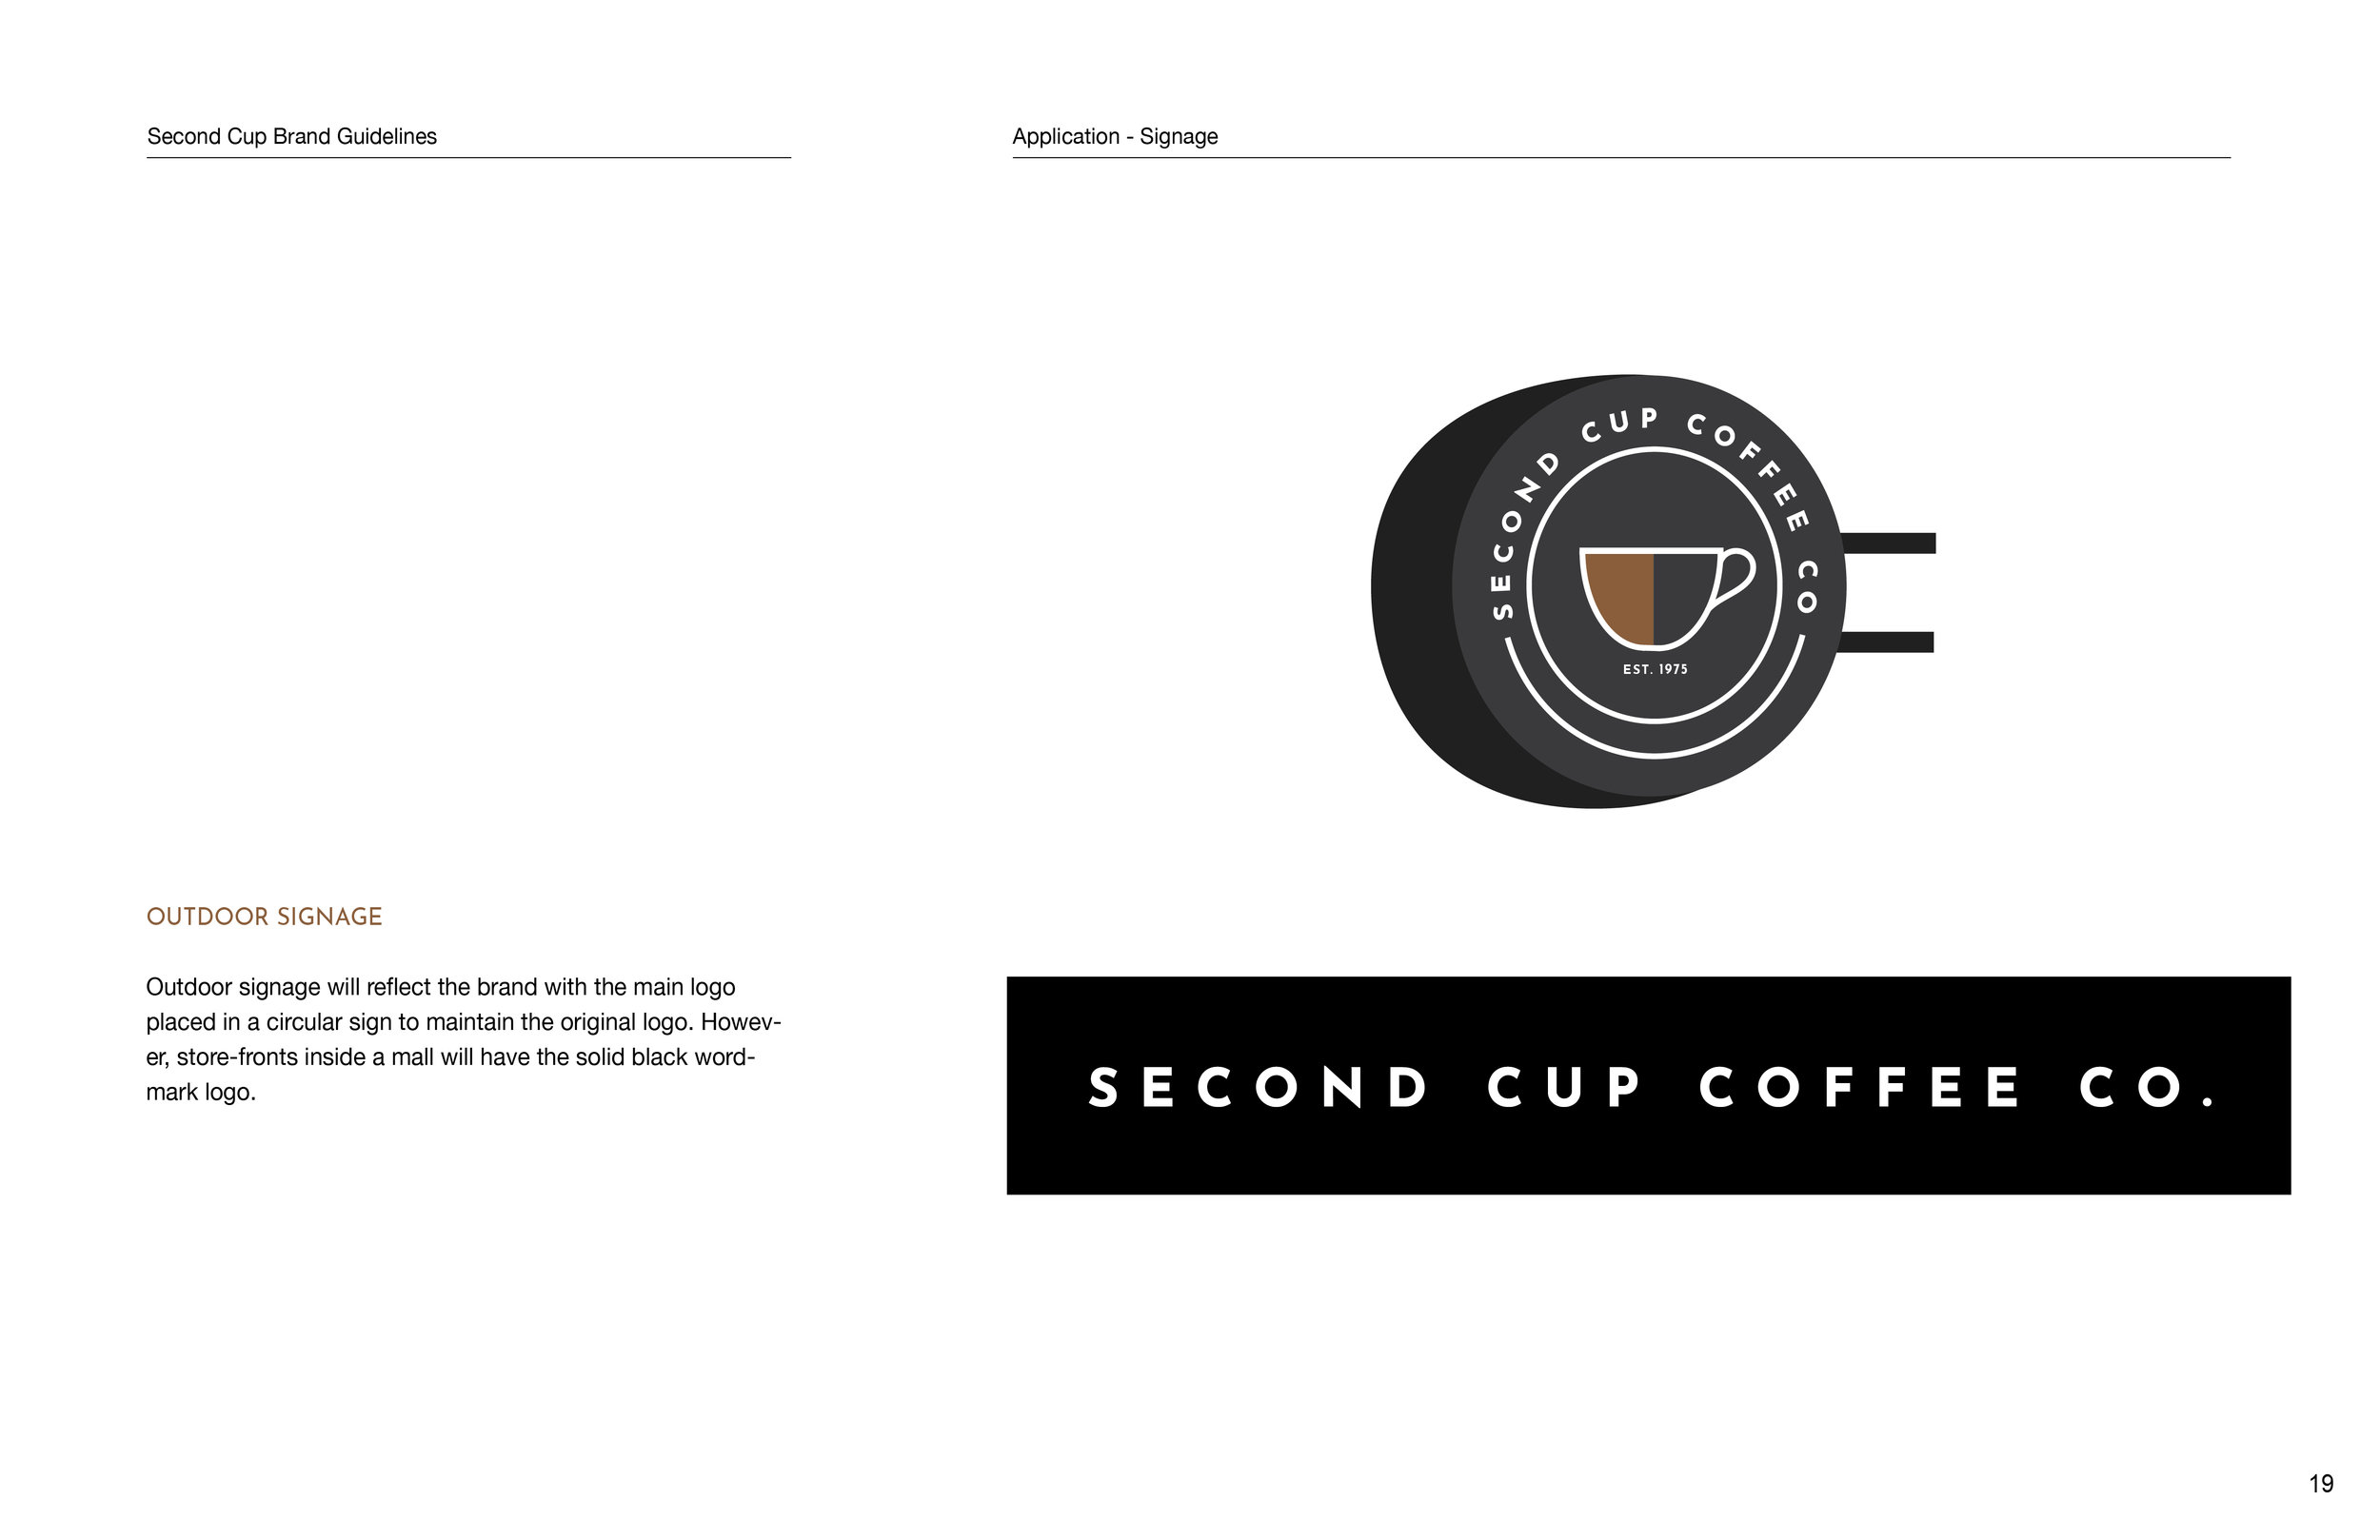 second-cup-brand guide-21.jpg